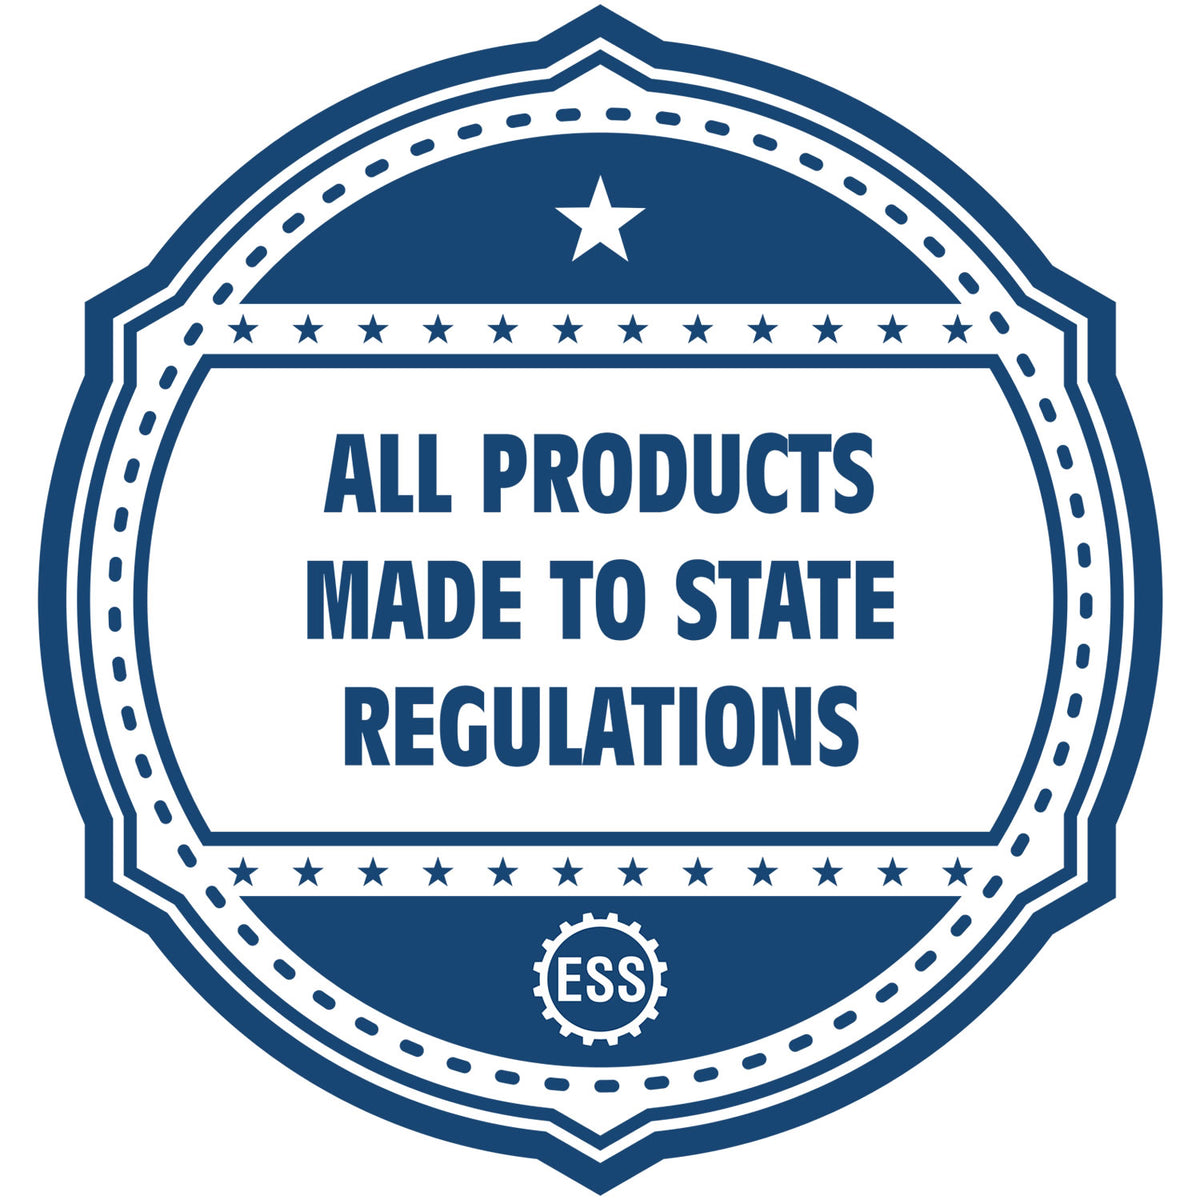 An icon or badge element for the Premium MaxLight Pre-Inked Iowa Engineering Stamp showing that this product is made in compliance with state regulations.